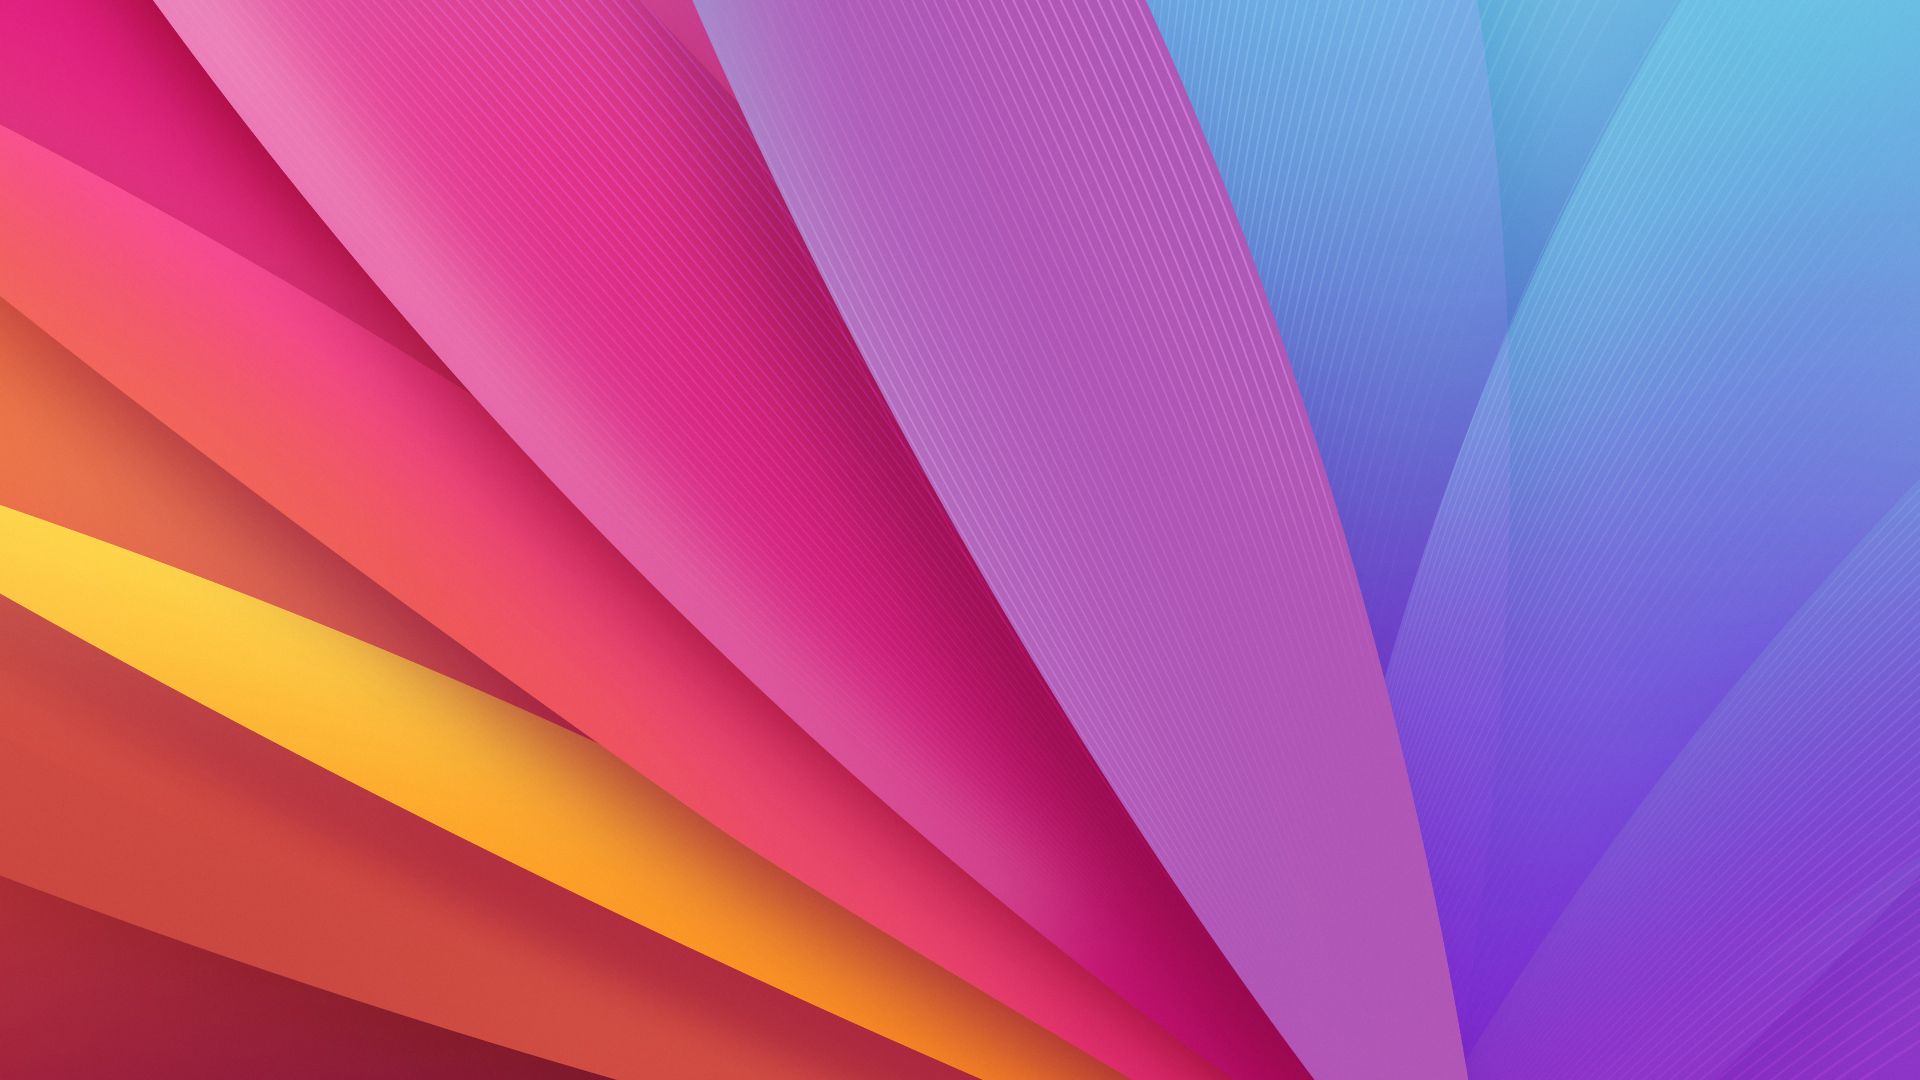 8k Wallpaper Abstract Graphic